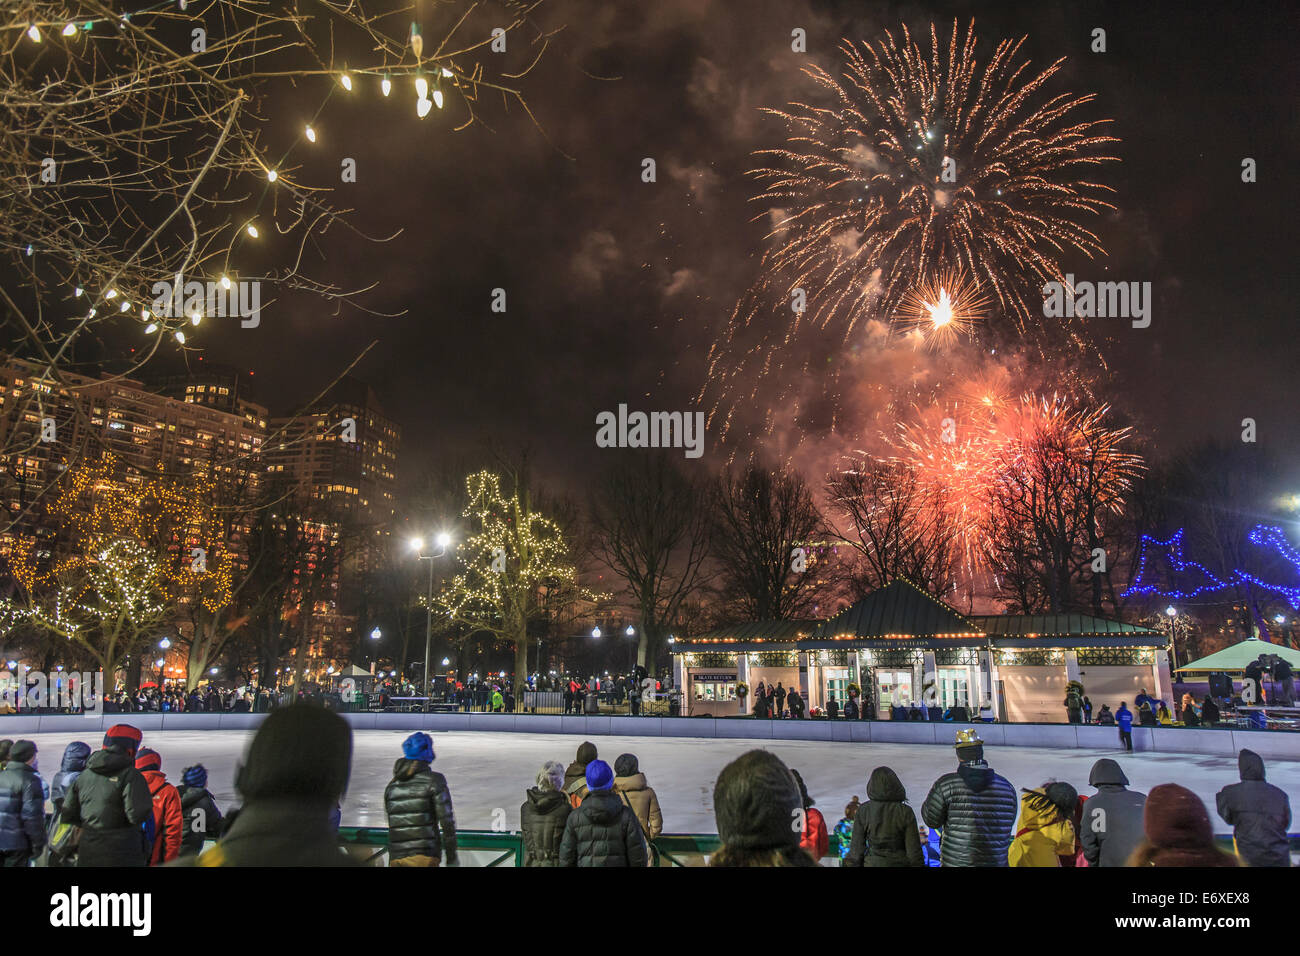 New Year's Eve fireworks sur Boston Common Frog Pond, Boston, Massachusetts, USA Banque D'Images